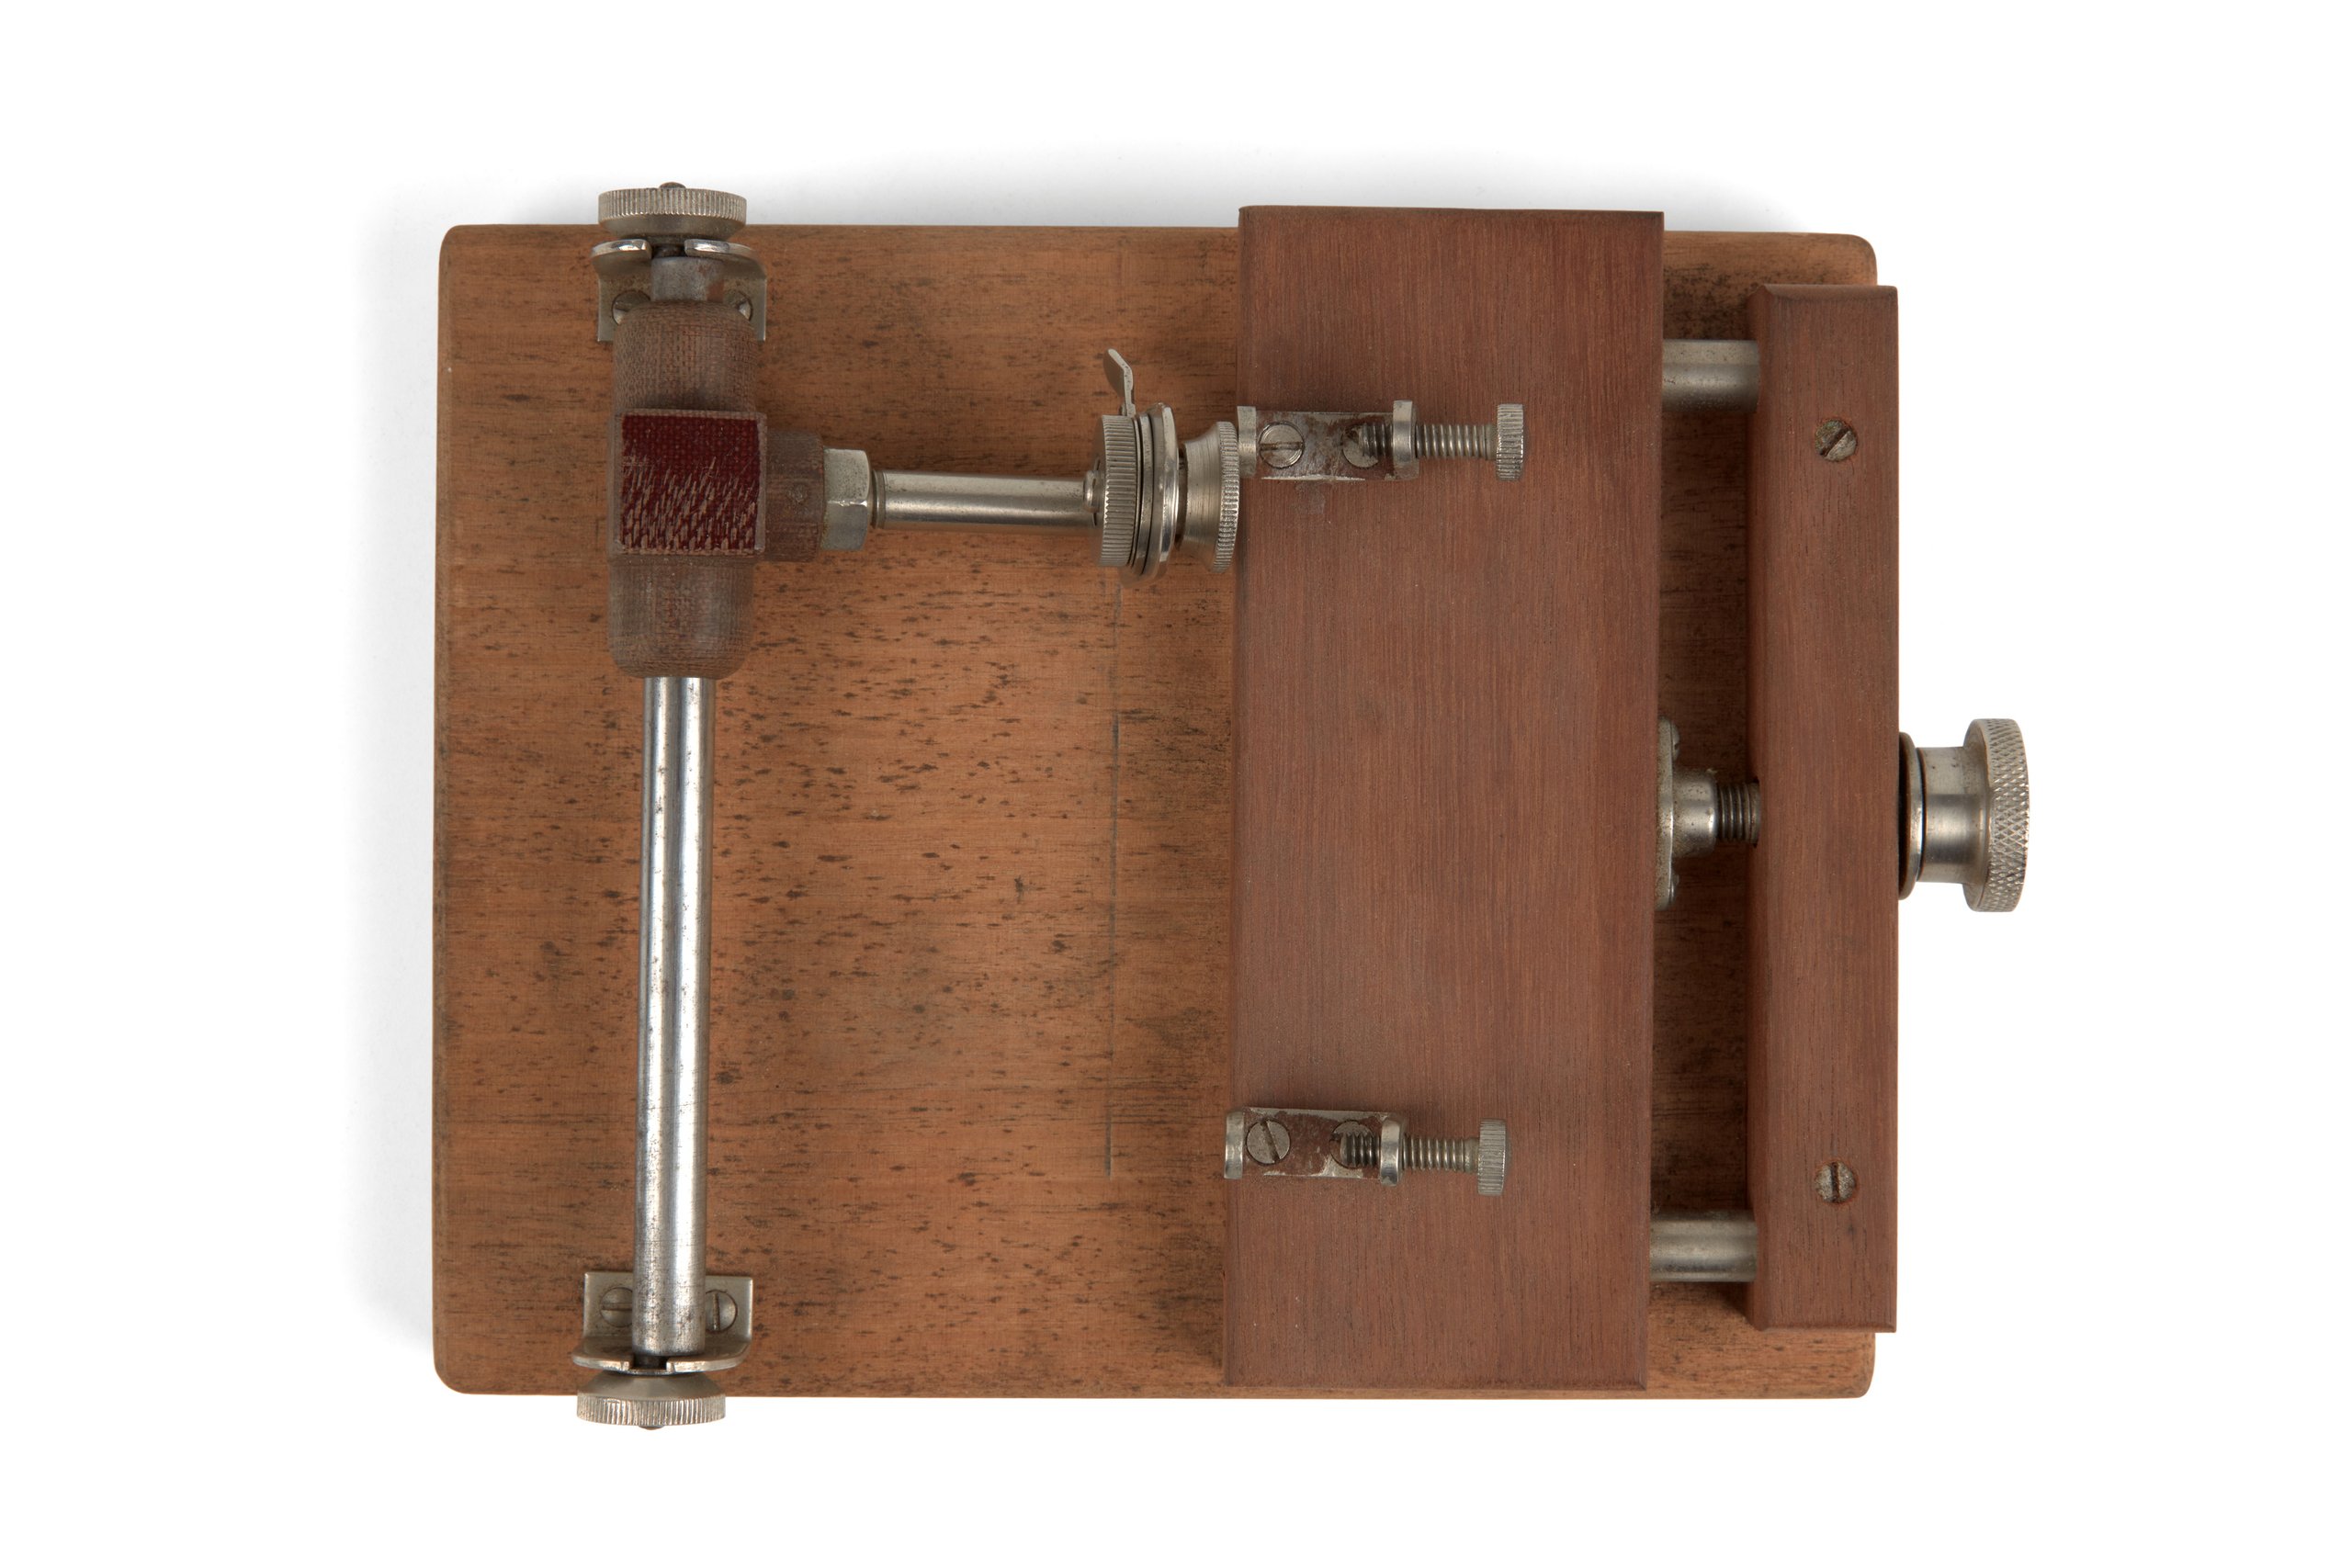 Powerhouse Collection - Hand operated needle sharpener with instructions